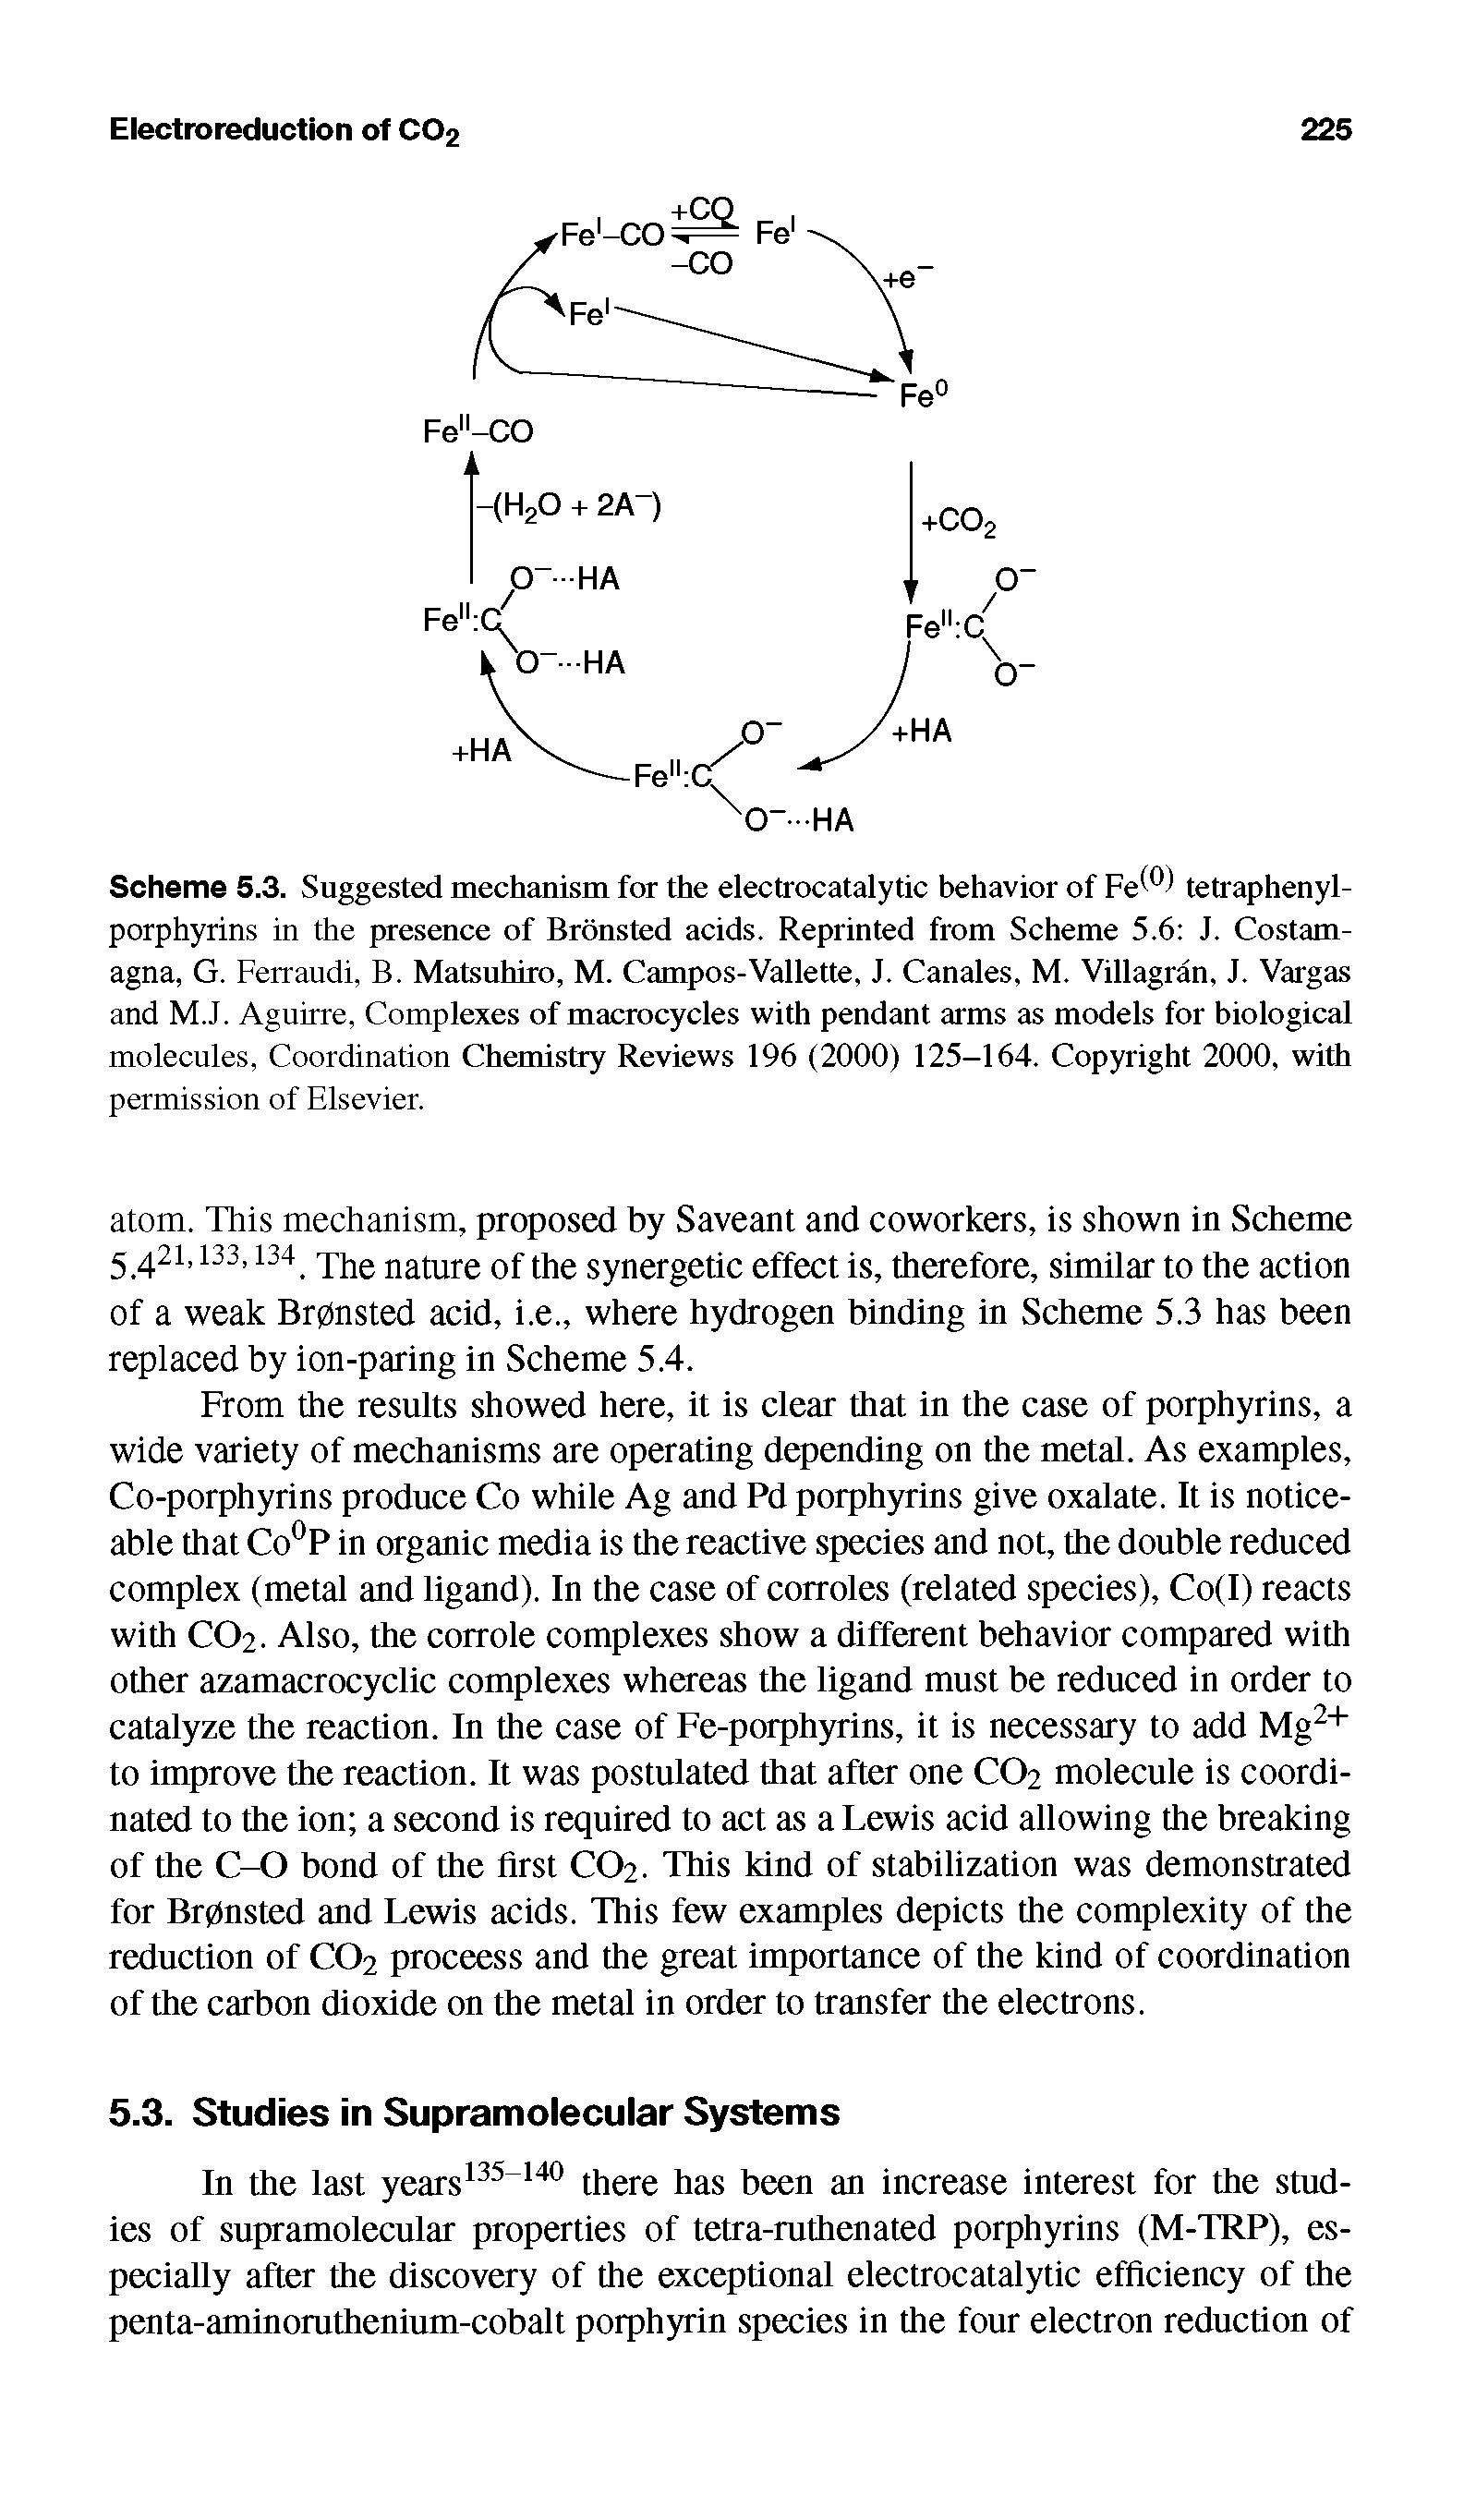 Scheme 5.3. Suggested mechanism fca- the electrocatalytic behavior of Fe tetraphenyl-porphyrins in the presence of Bronsted acids. Reprinted from Scheme 5.6 J. Costam-agna, G. Ferraudi, B. Matsuhiro, M. Campos-Vallette, J. Canales, M. Villagran, J. Vargas and M.J. Aguirre, Complexes of macrocycles with pendant arms as models for biological molecules, Coordination Chemistry Reviews 196 (2000) 125-164. Copyright 2000, with permission of Elsevier.